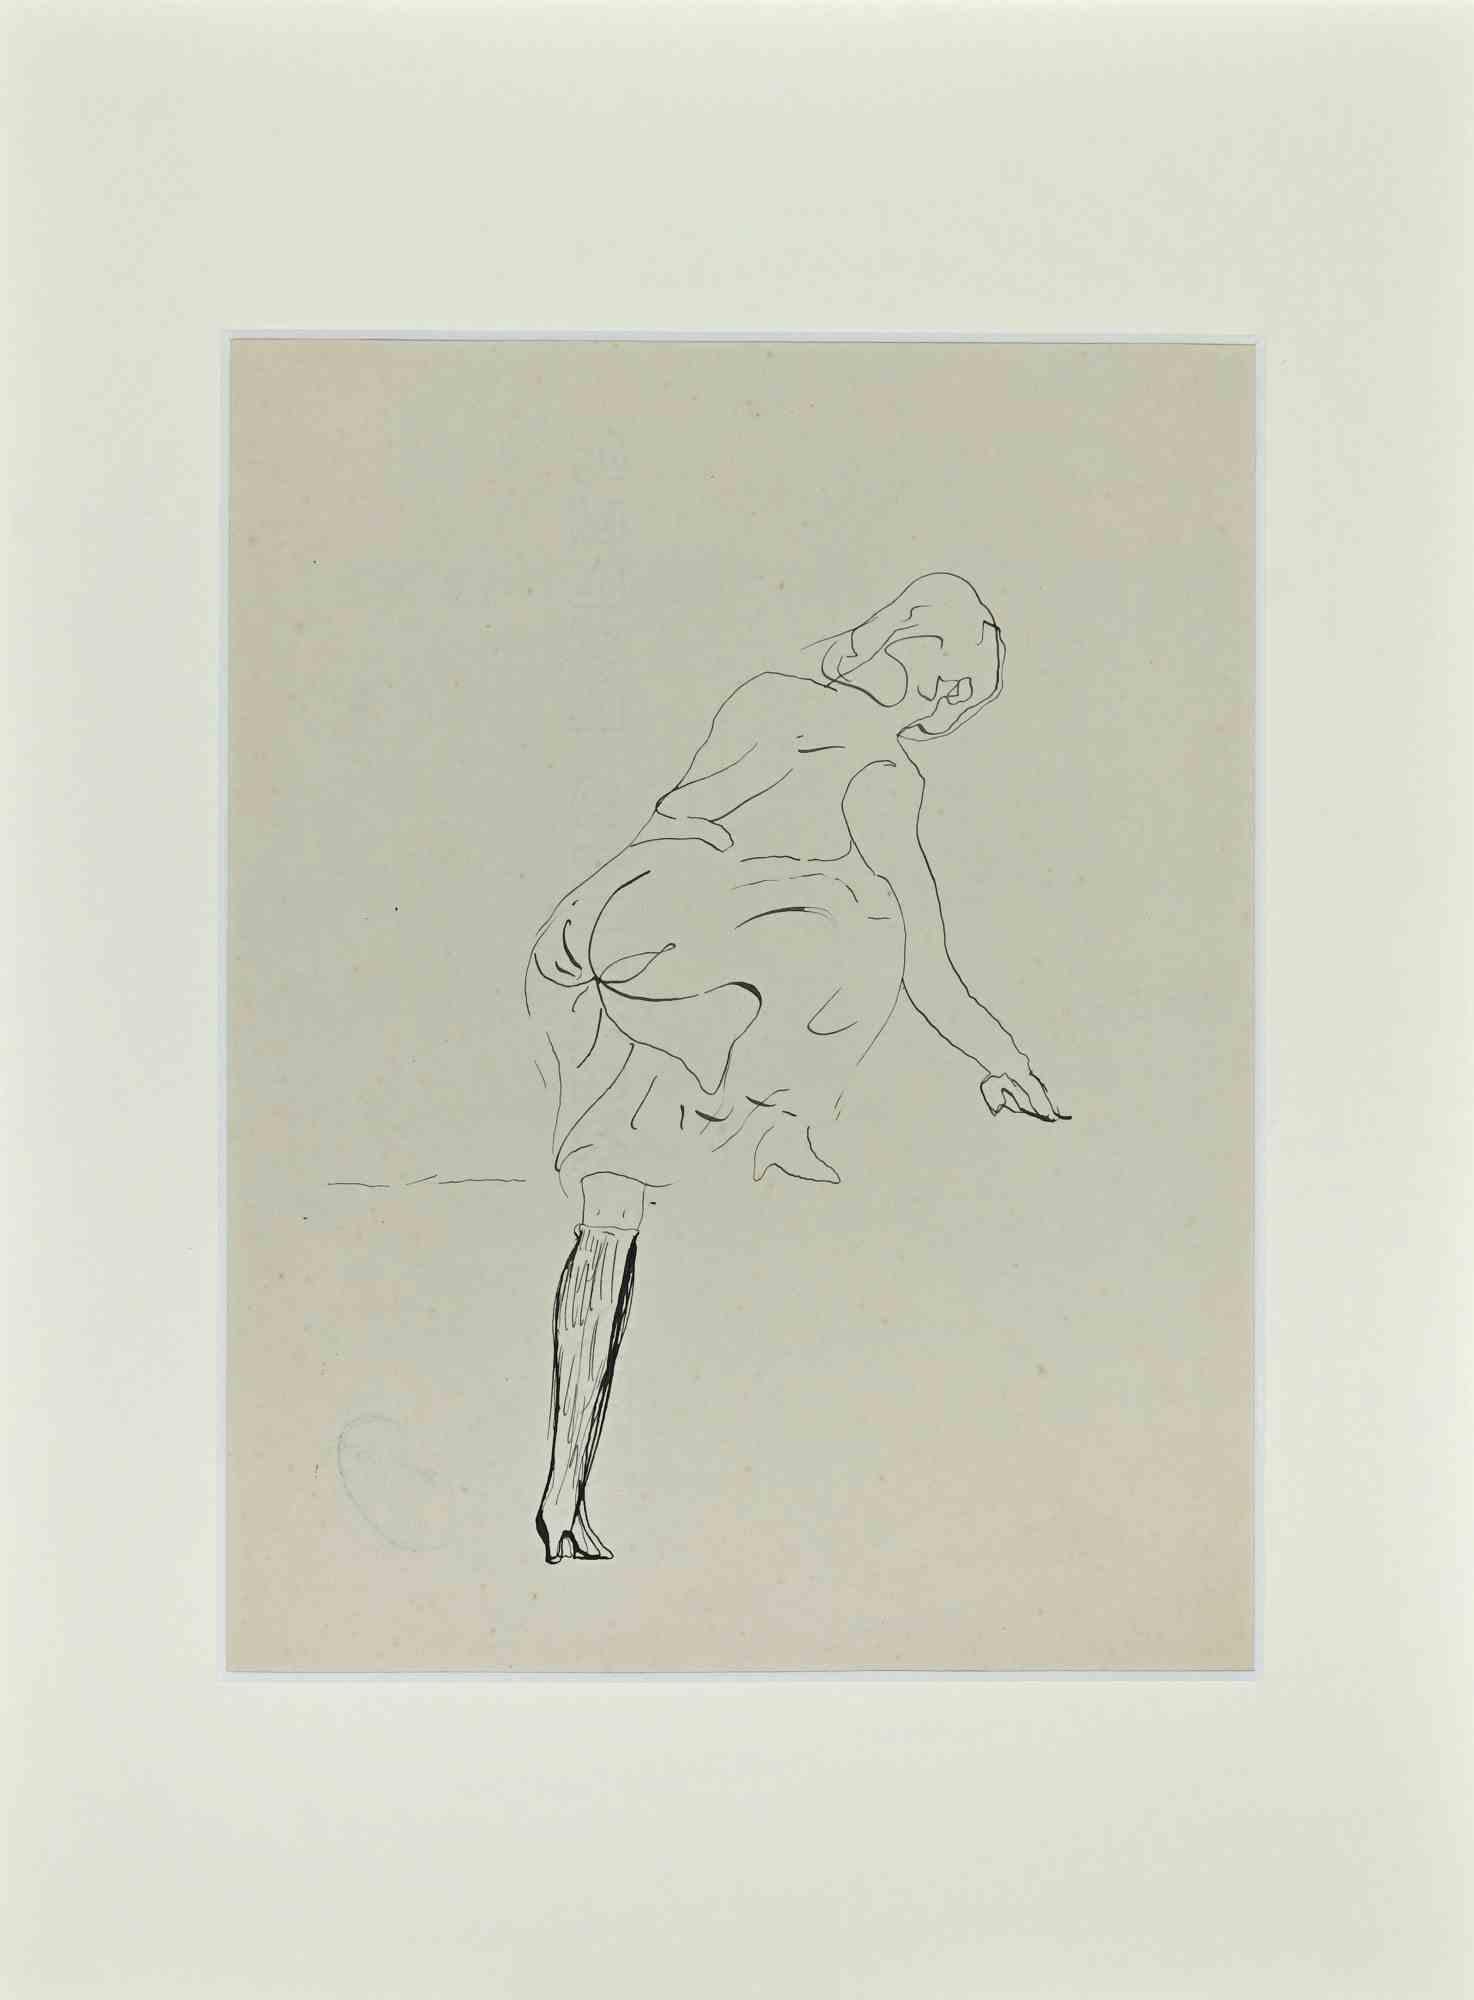 Posing Woman - Original Drawing by Lucien Coutaud - 1930s